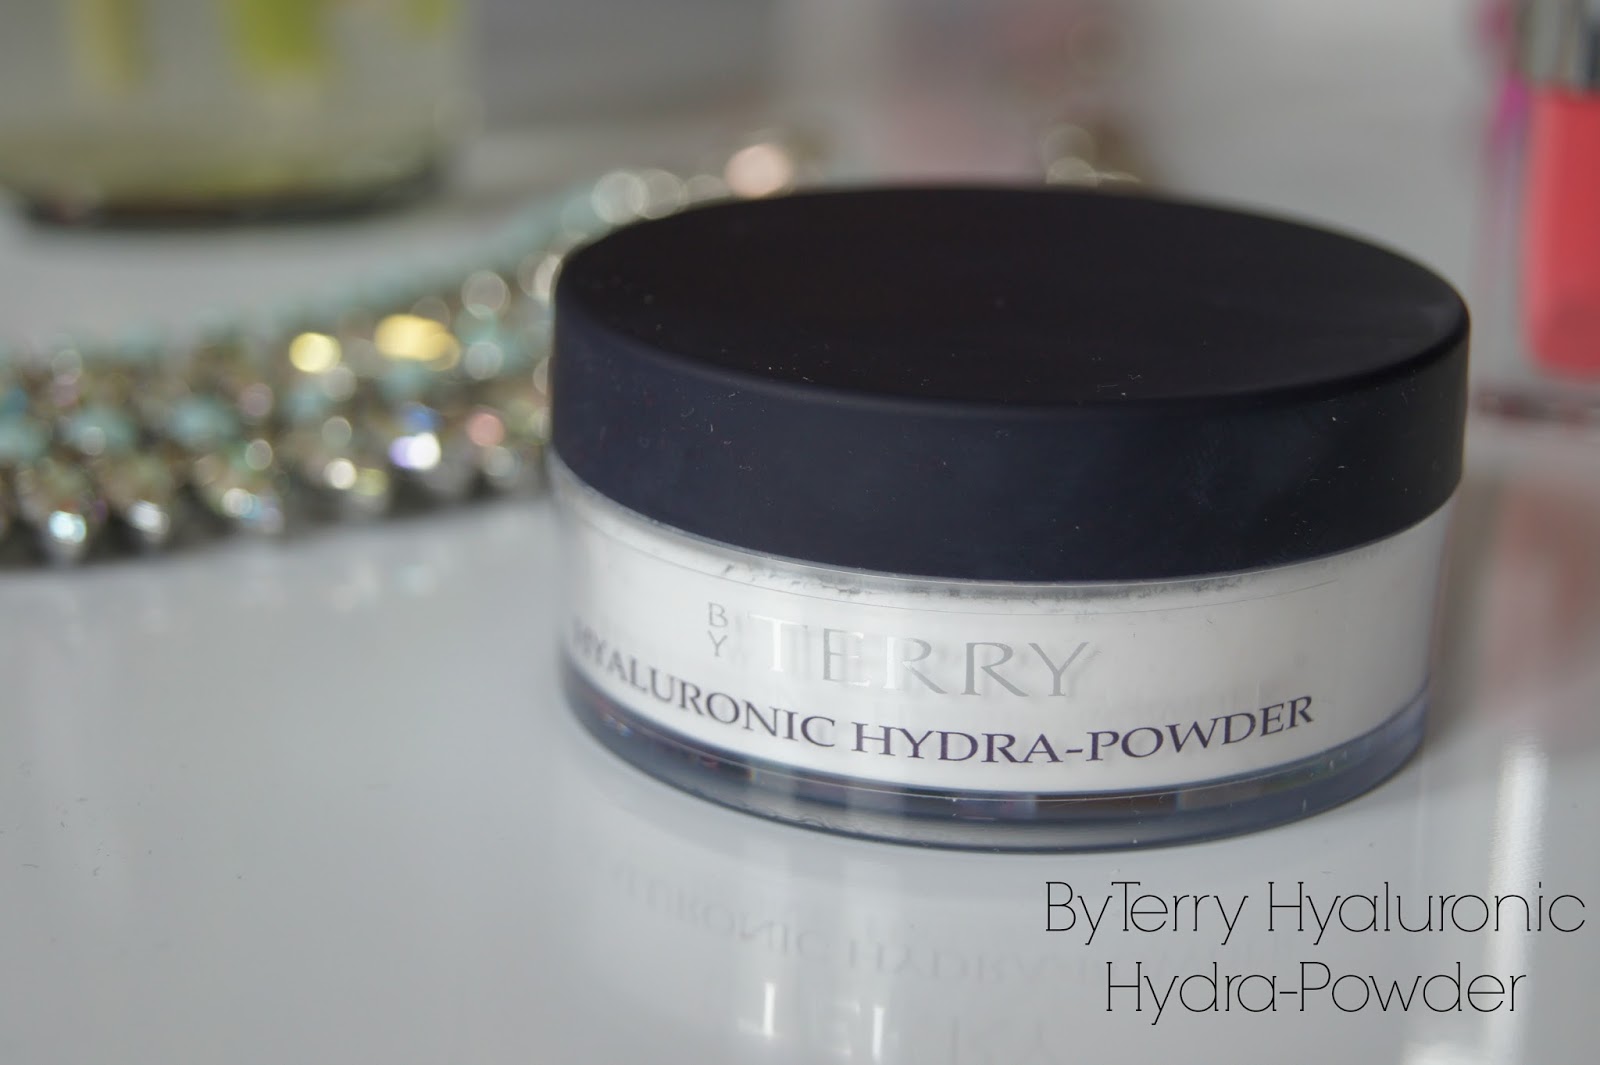 By Terry Hyaluronic Hydra Powder review